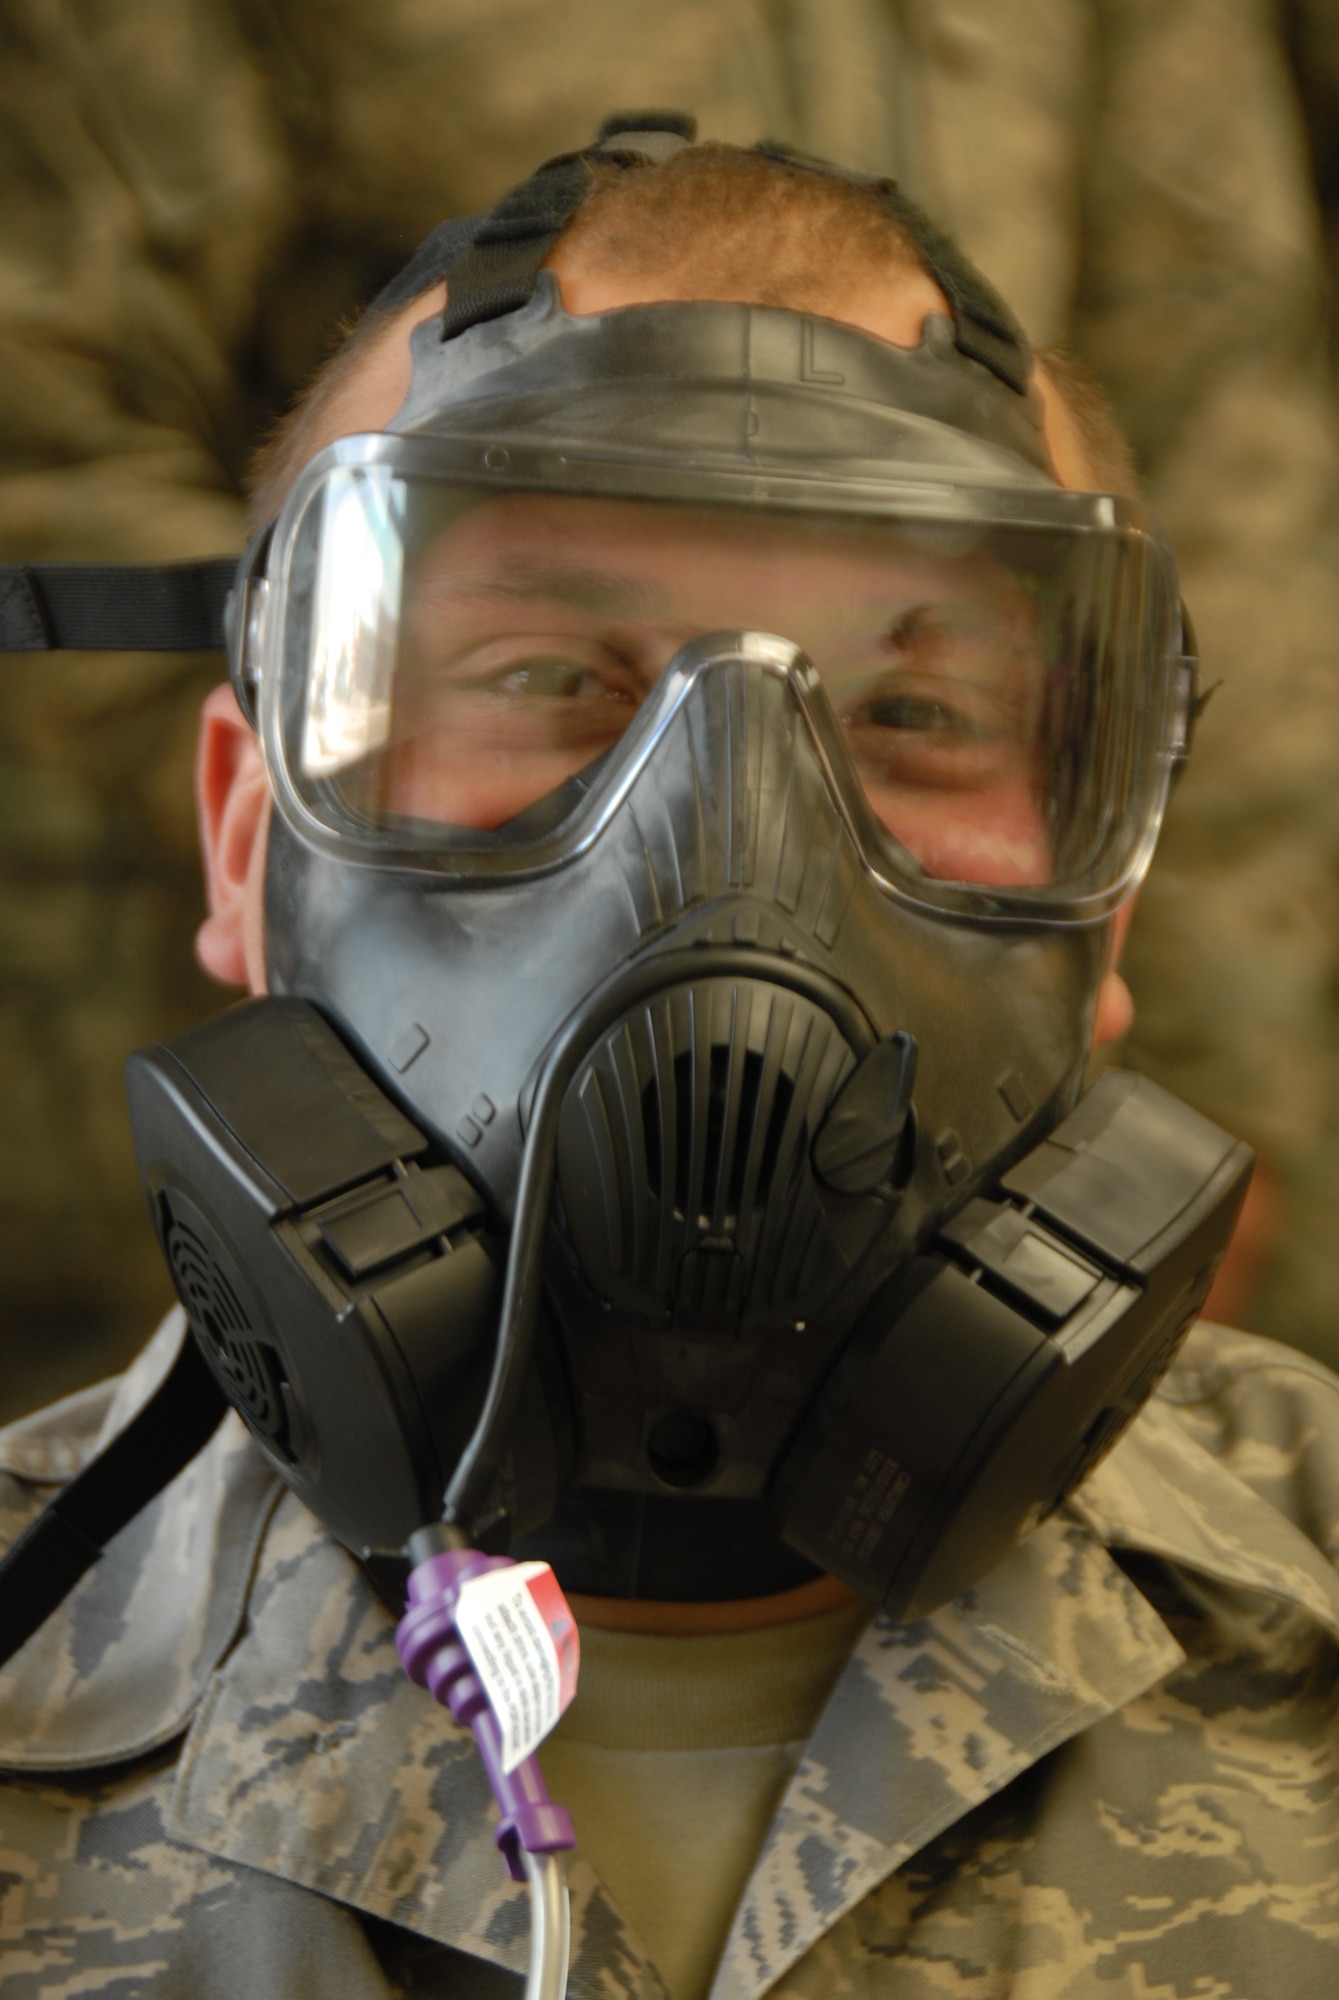 Senior Airman David Nelson, 115th Fighter Wing fuel shop, tests his gas mask for a good seal at the Credit Union building on Truax Field on April 7. Nelson used different breathing techniques and moved his head various directions to ensure his mask had a good seal throughout the testing. Airman at the 115th Fighter Wing just received the M50 gas masks and will all be required to accomplish the fit-tests on their masks. (Air National Guard photo by Andrea F. Liechti)